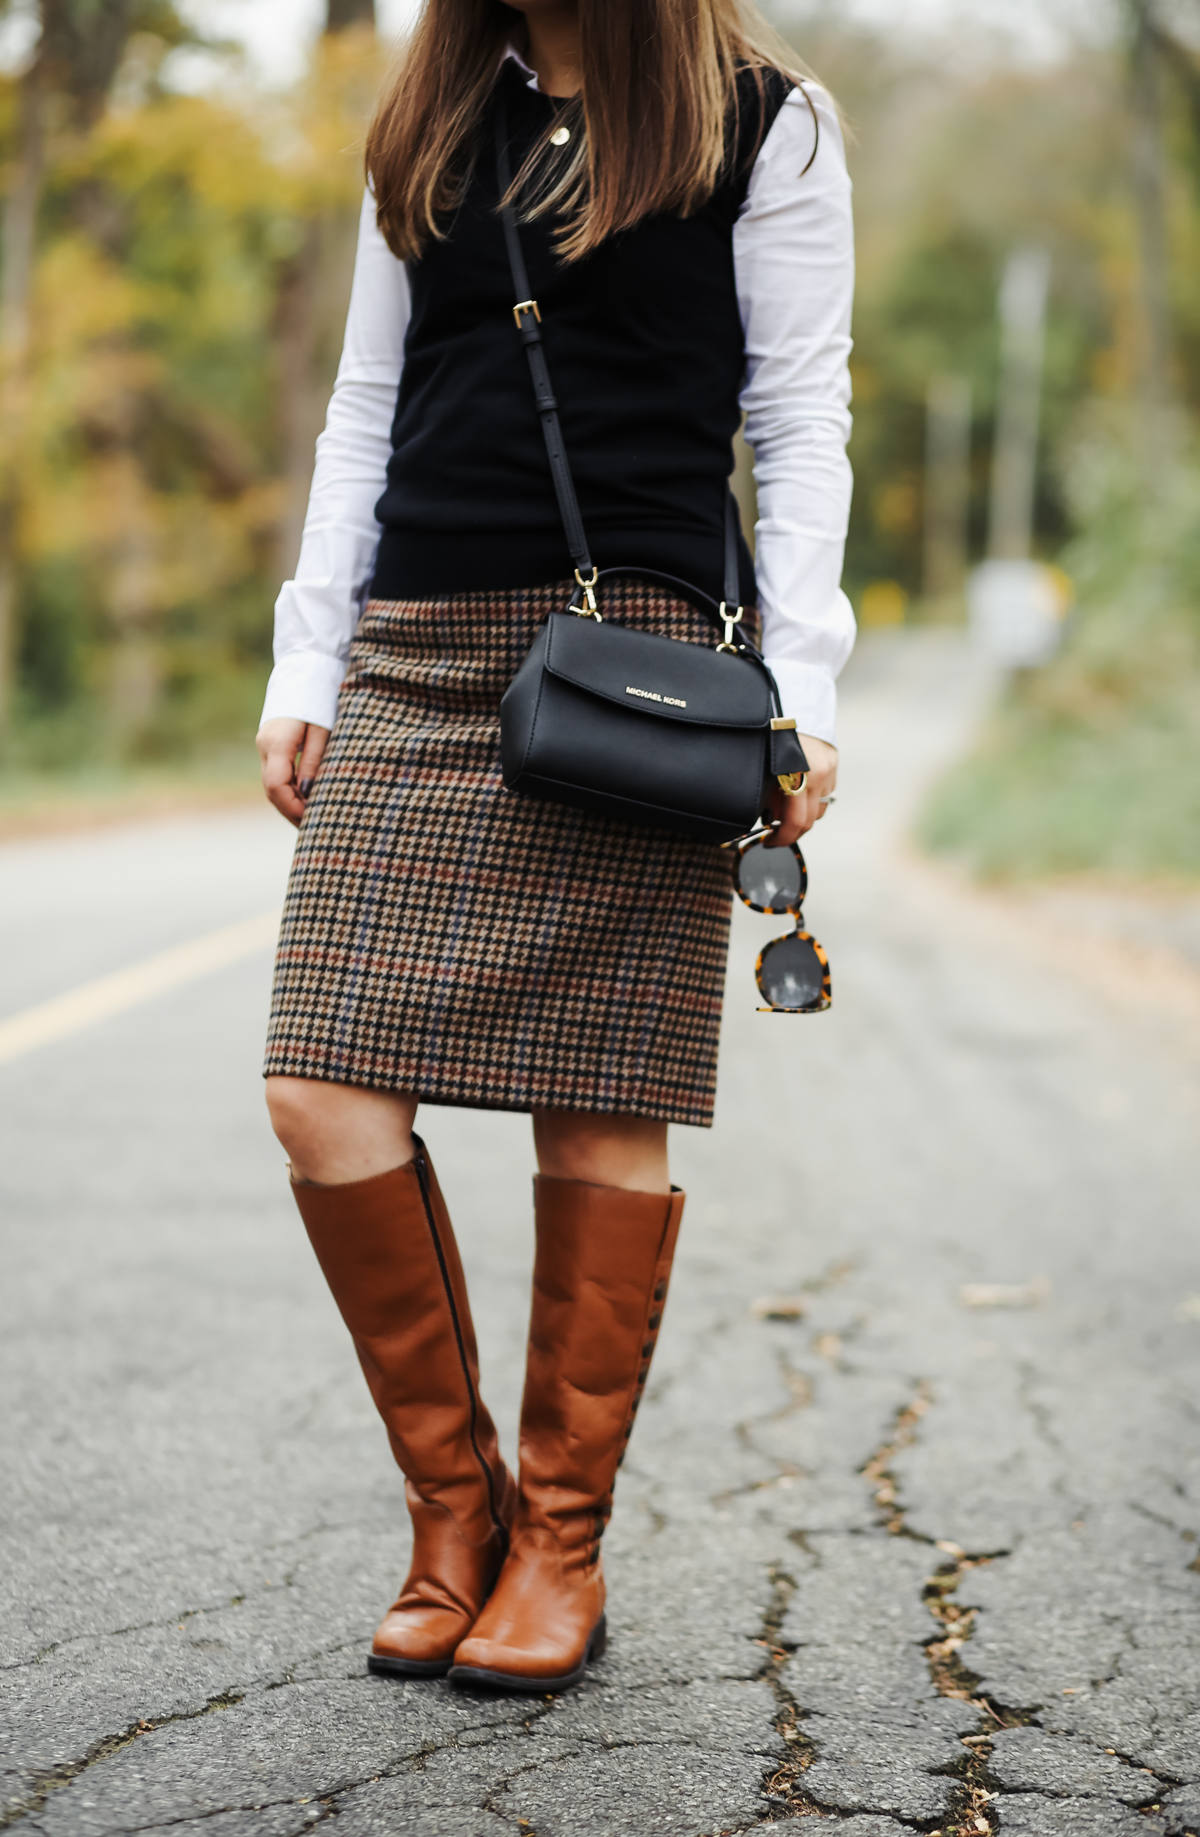 Tory Burch Derby Riding Boot Tory Burch Robinson Tote Oxford Dress New  England Preppy Style Outfit Fall_-3 - SHOP DANDY